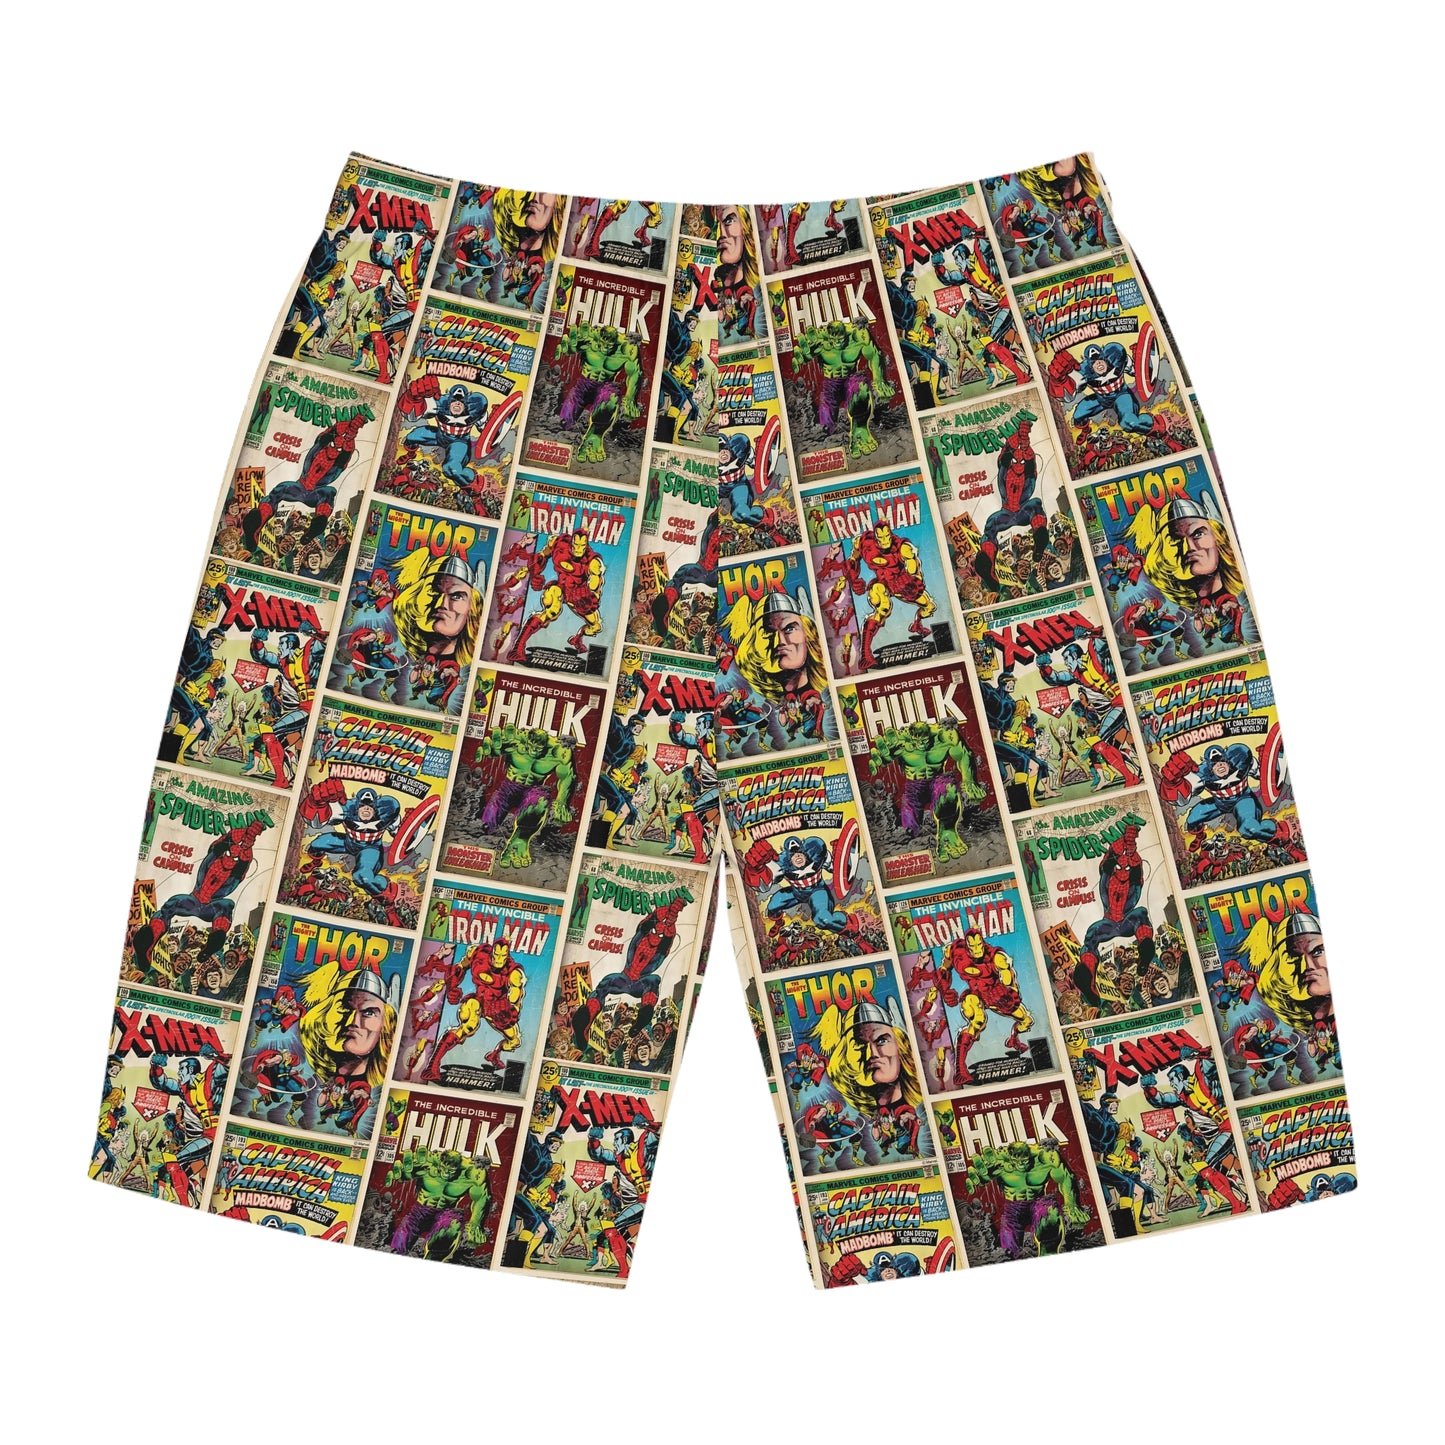 Marvel Comic Book Cover Collage Men's Board Shorts